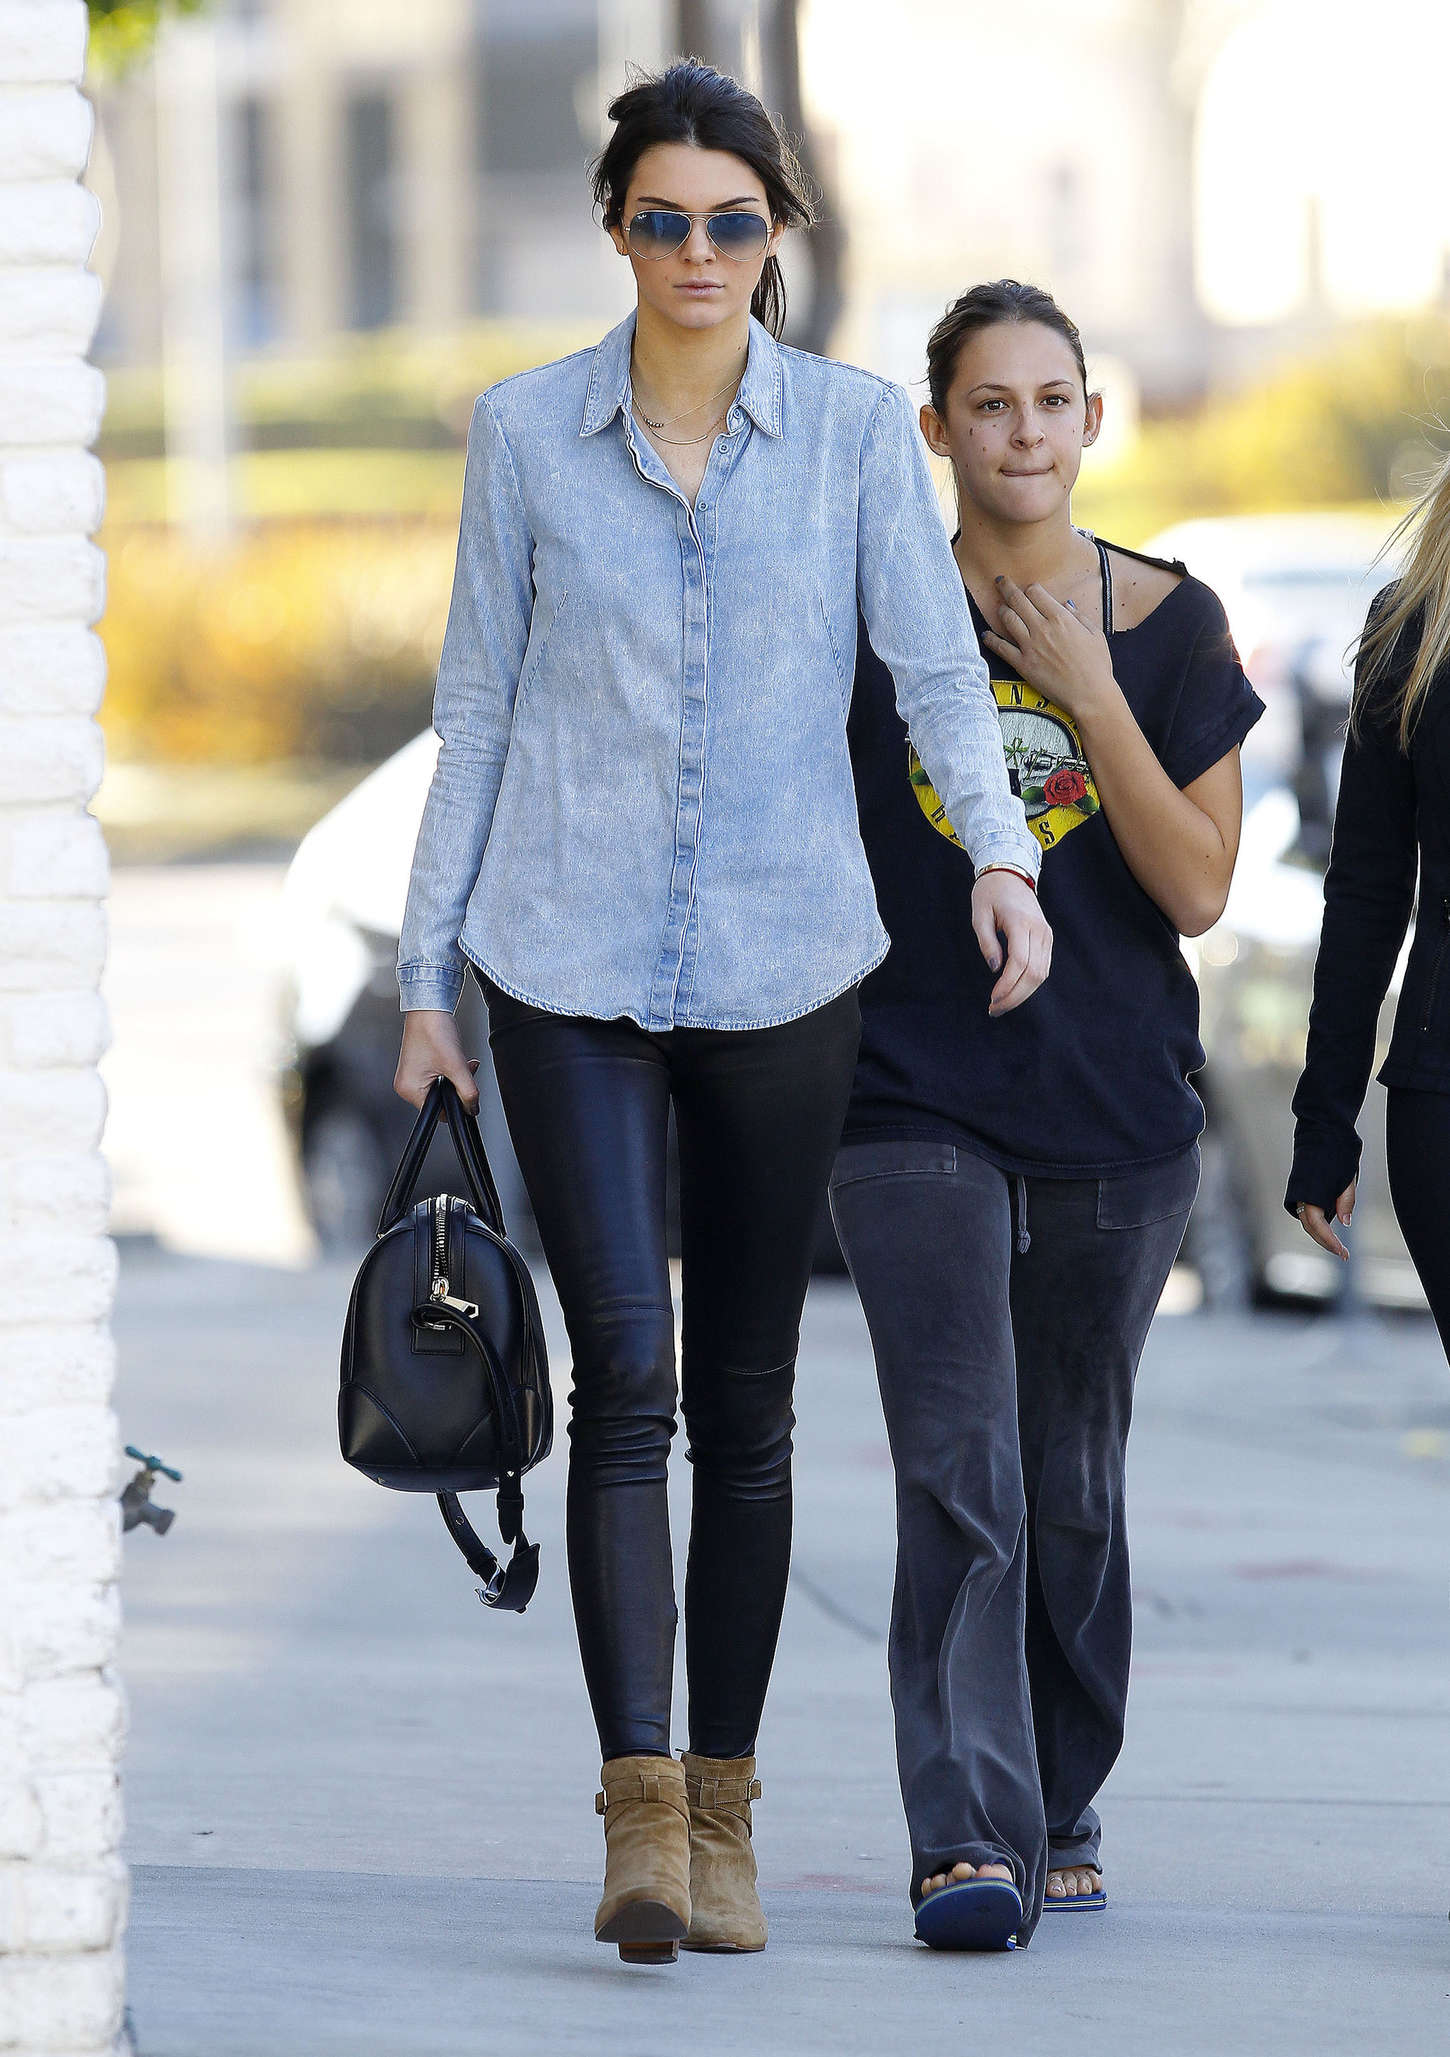 Kendall Jenner shopping for furniture with friends